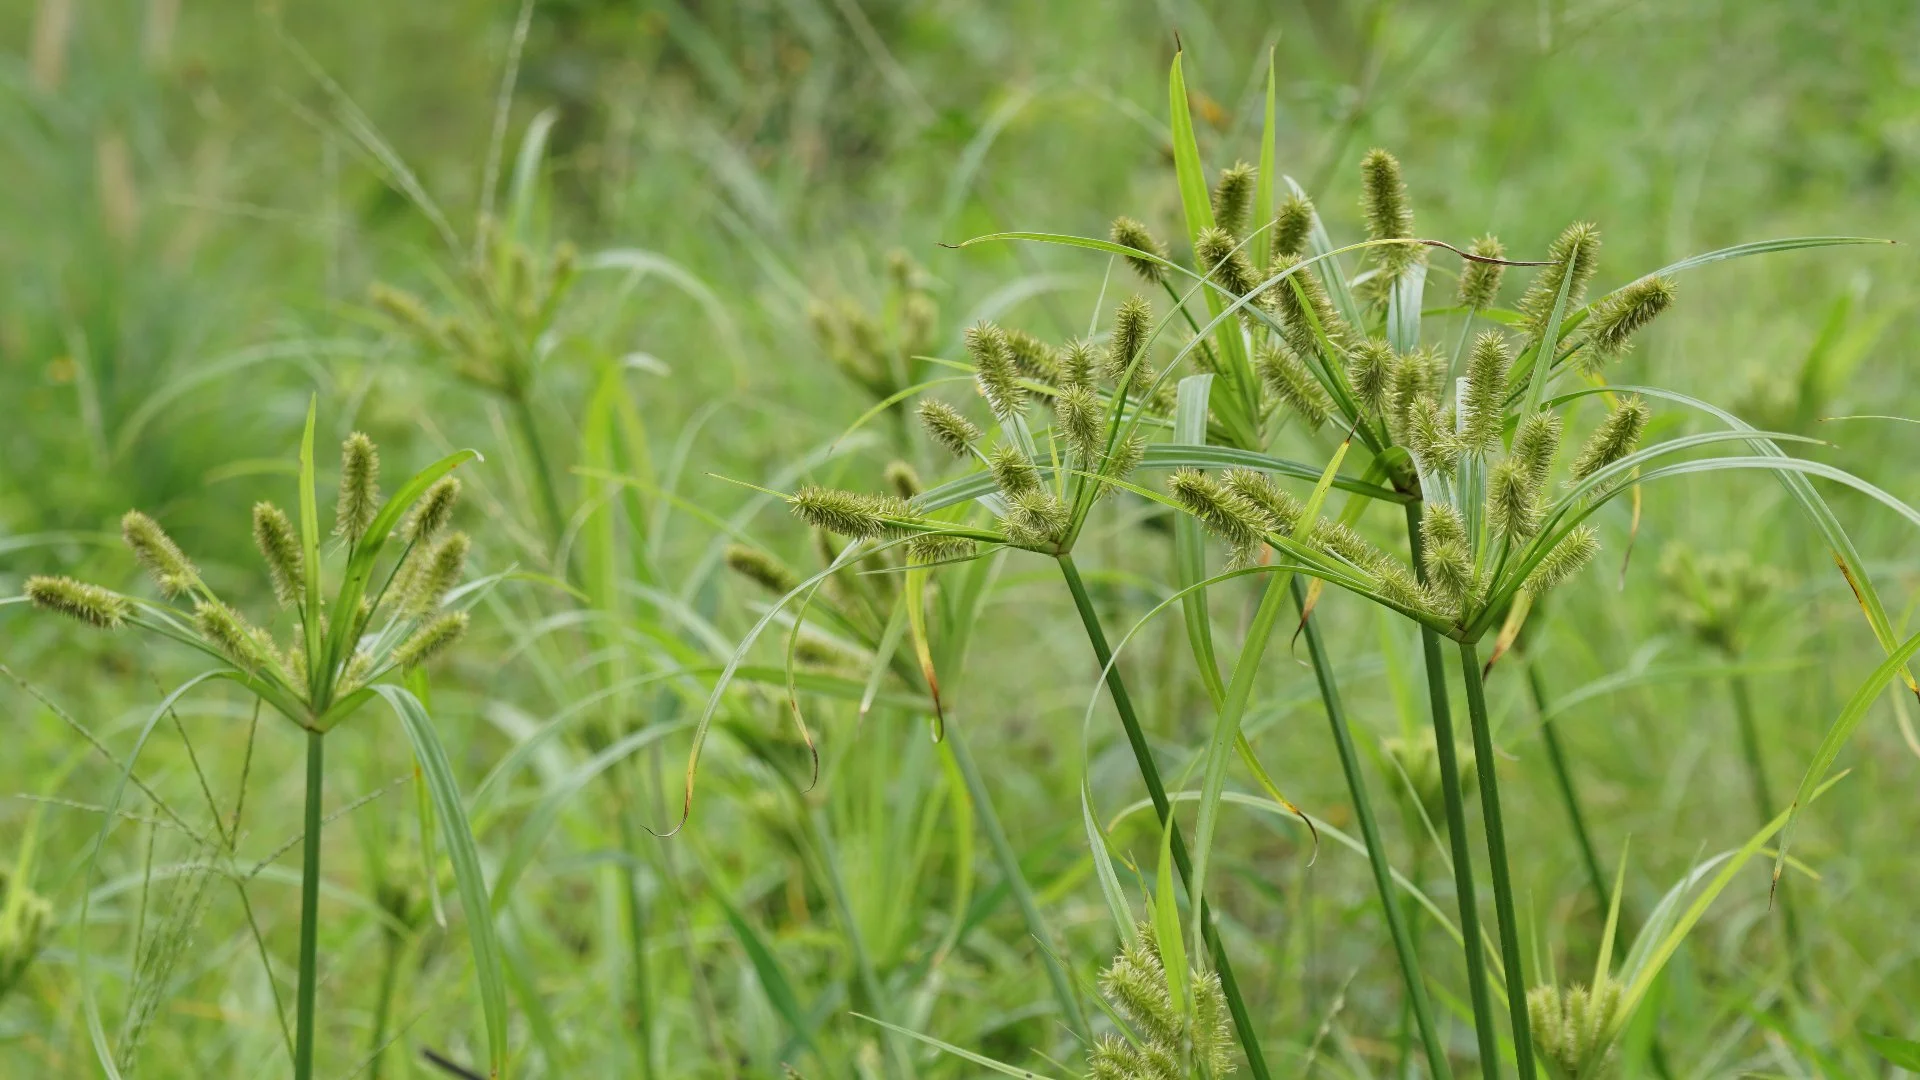 Nutsedge - A Rapidly Growing, Invasive Weed You’ll Want To Eliminate ASAP